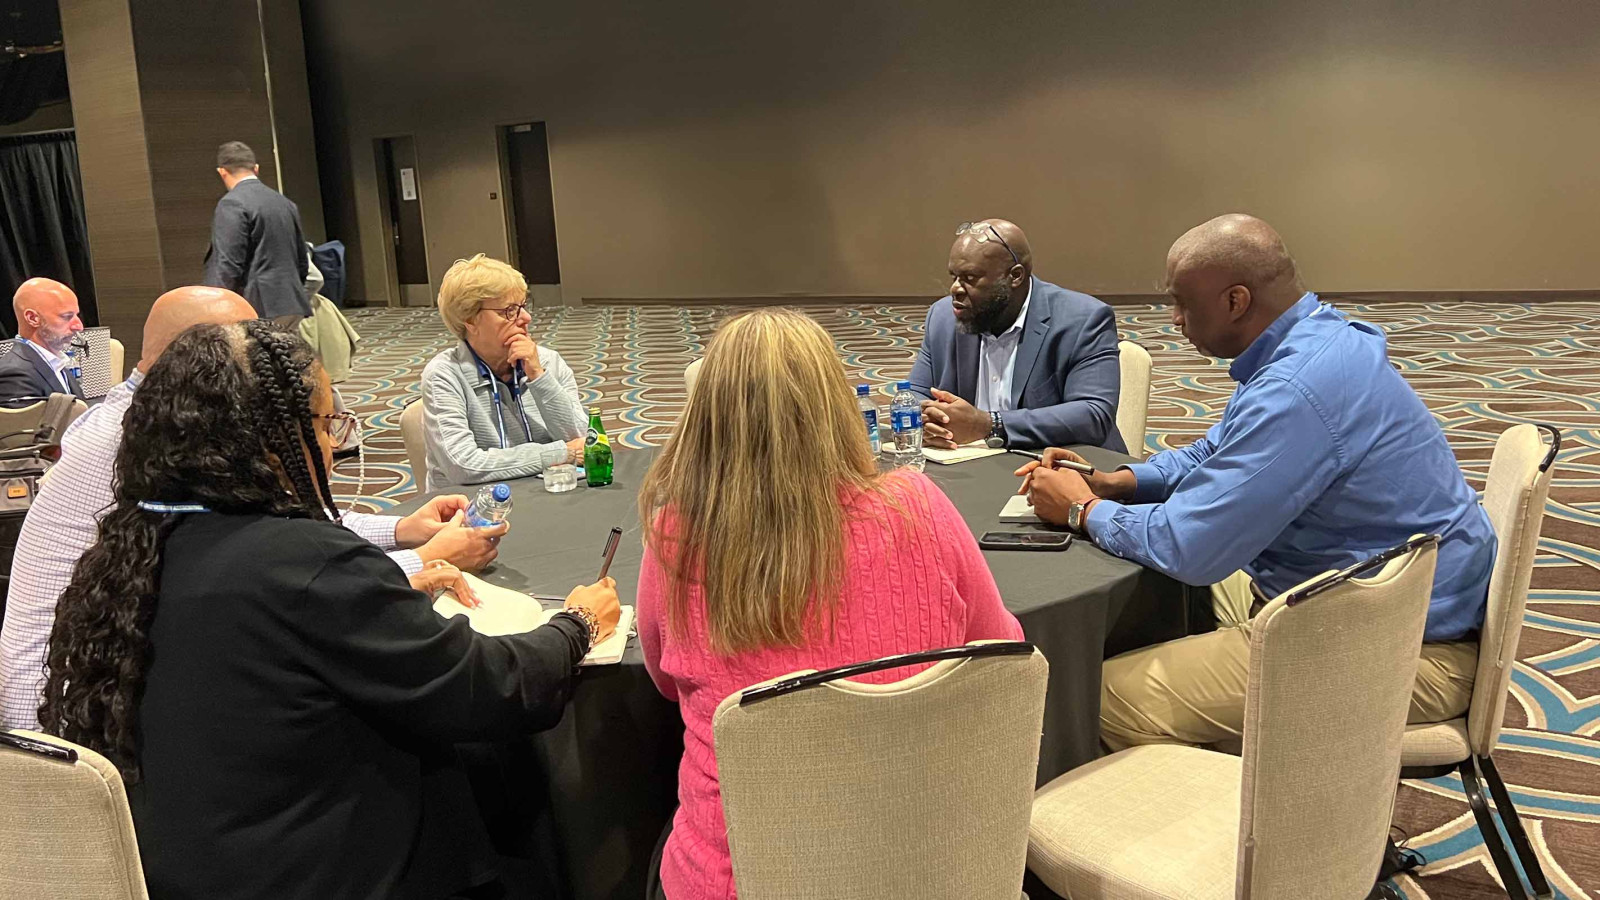 A group of APTA attendees sit around a table having a discussion